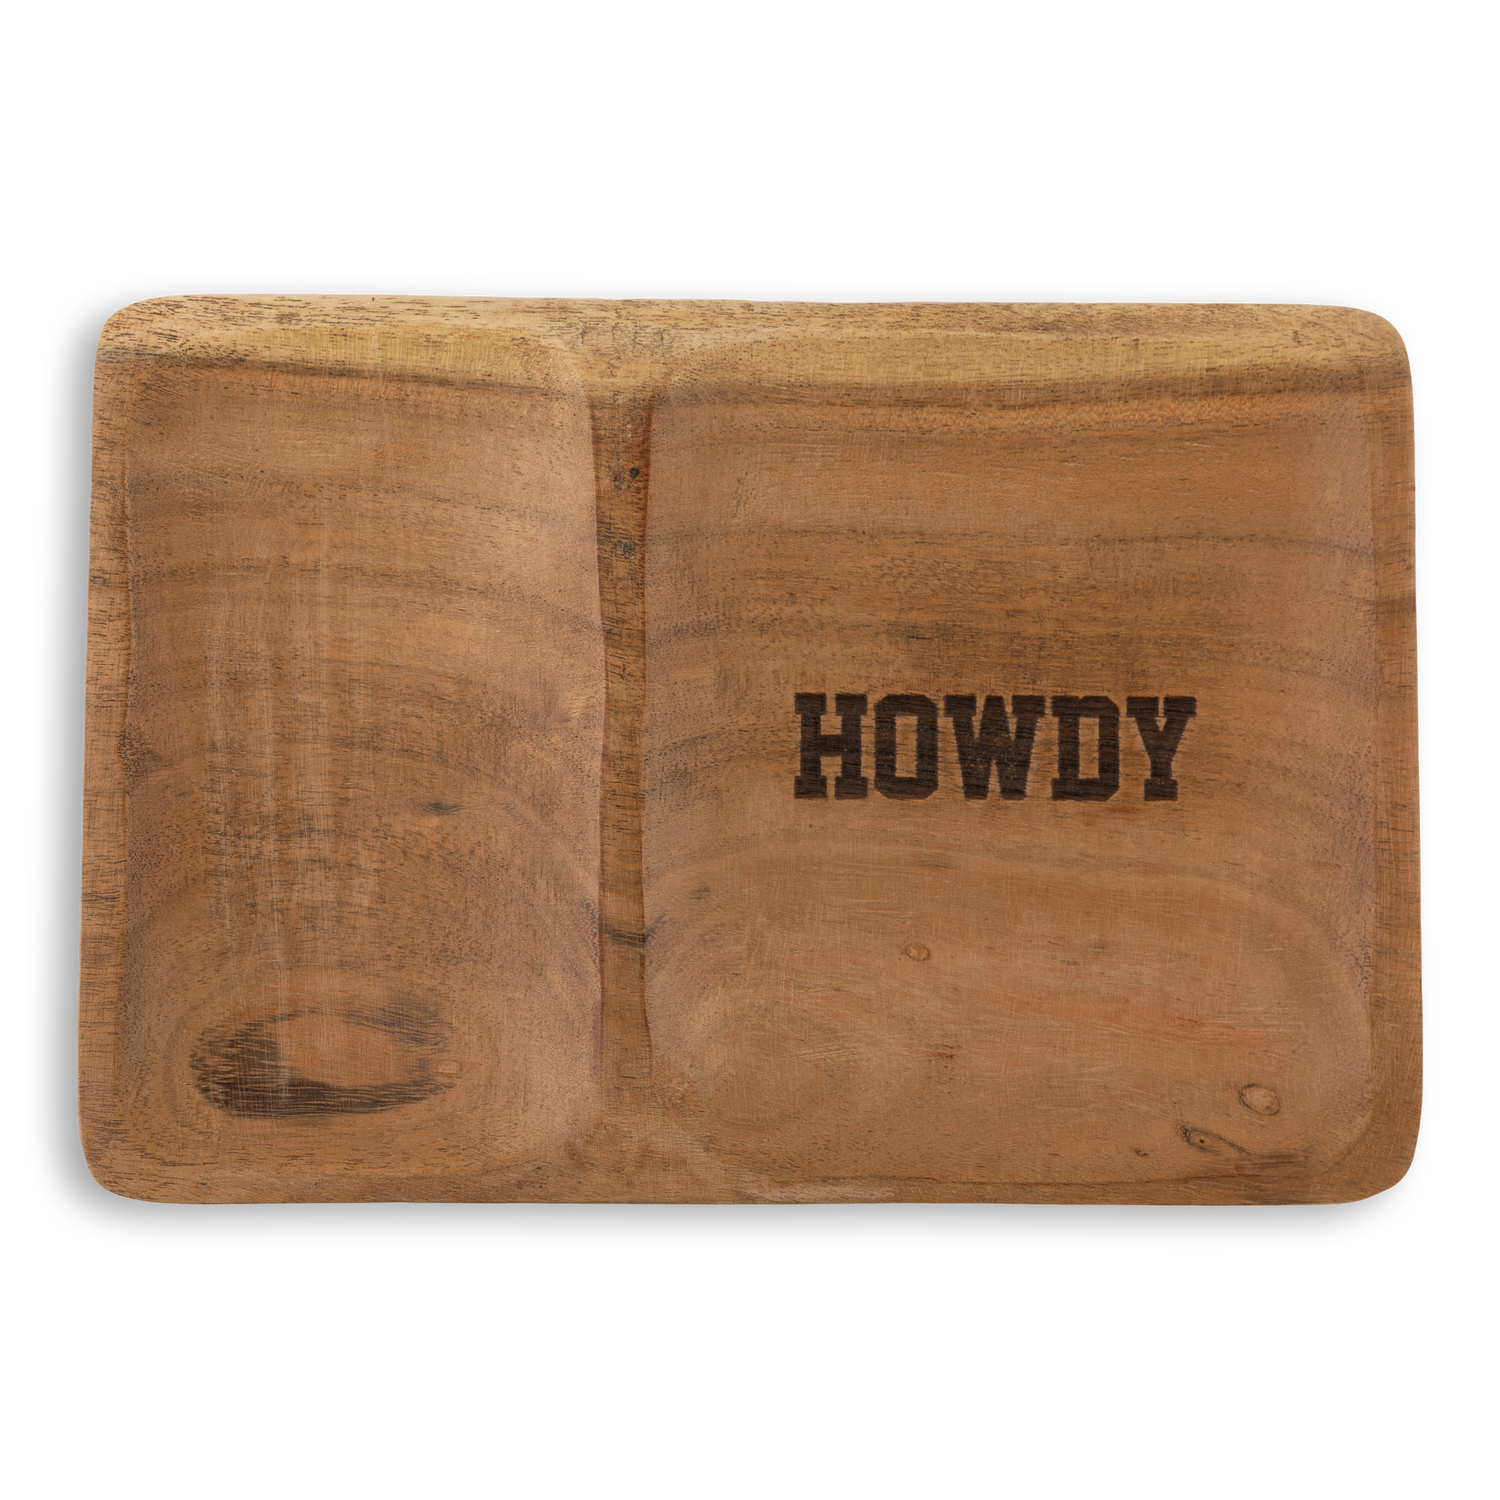 Howdy Etched Wood Valet Tray